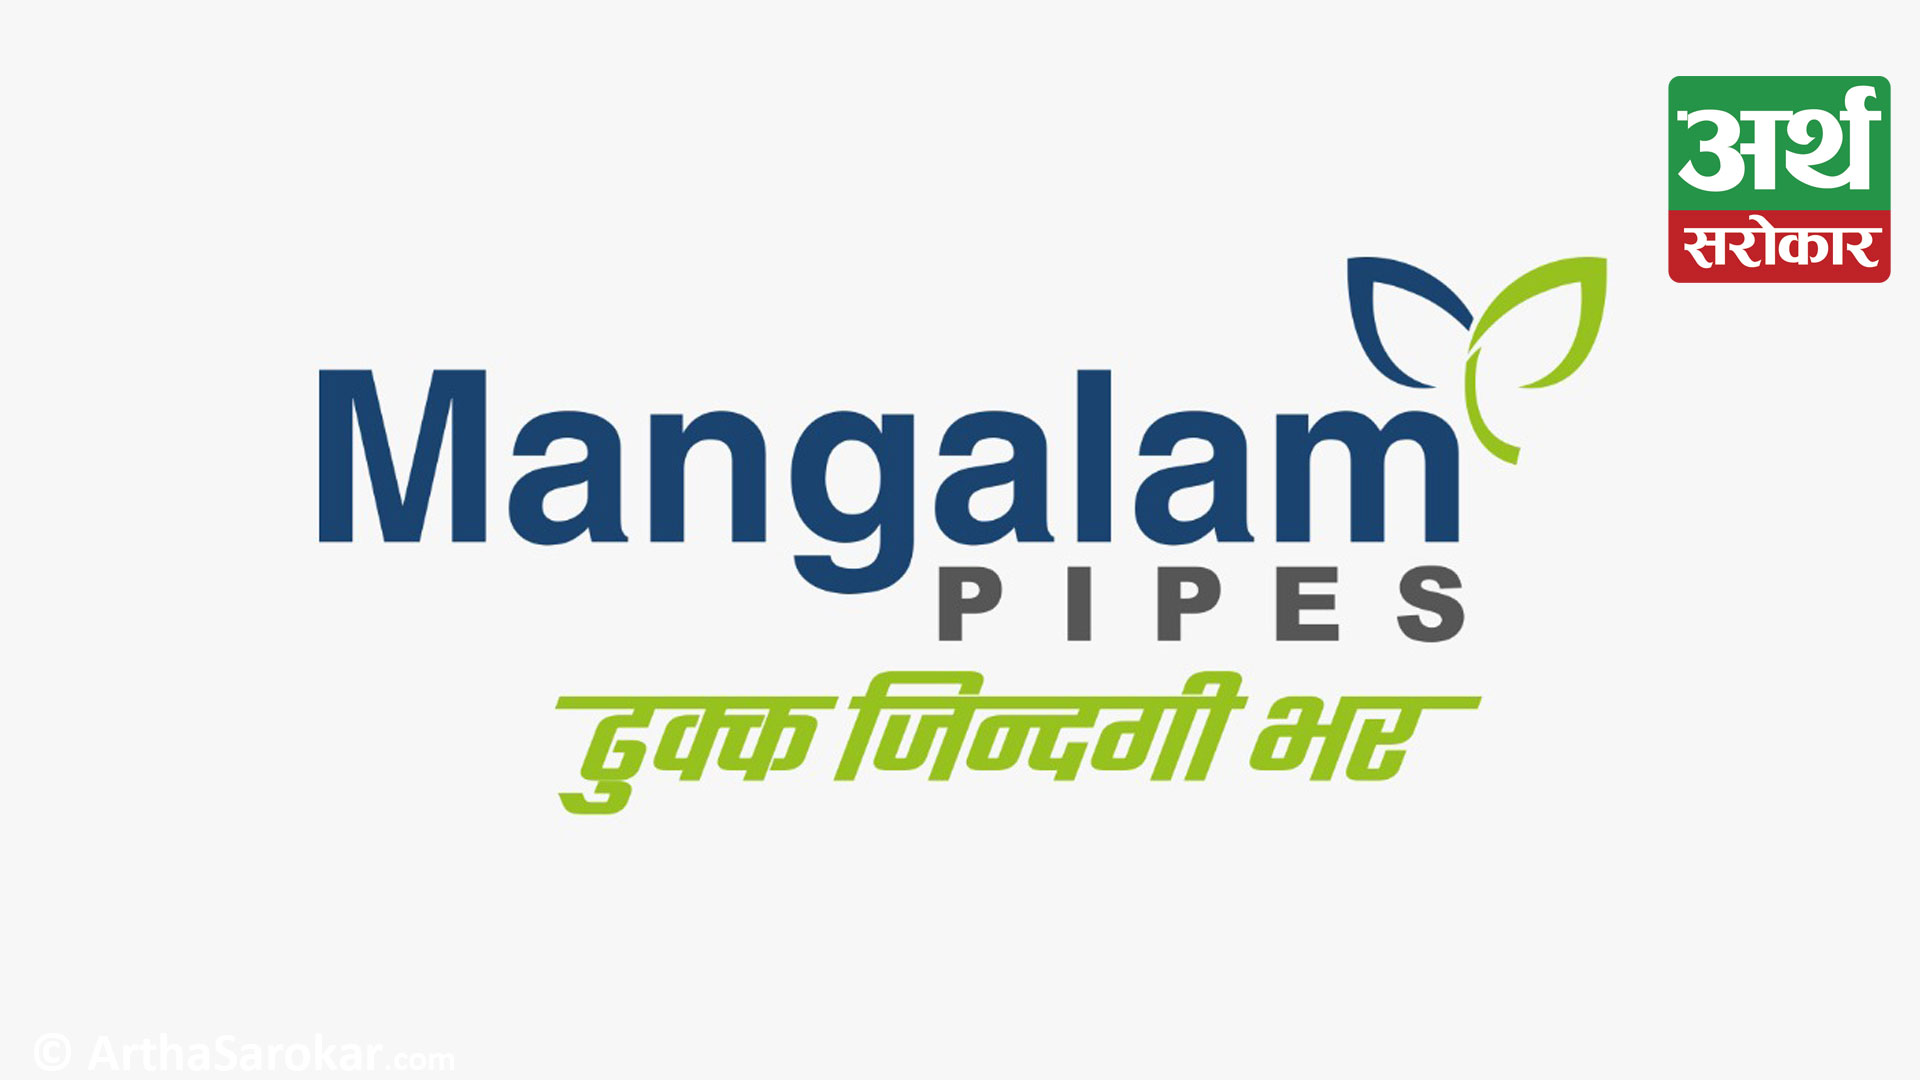 Sales of Mangalam Industry increased by 206 Percent